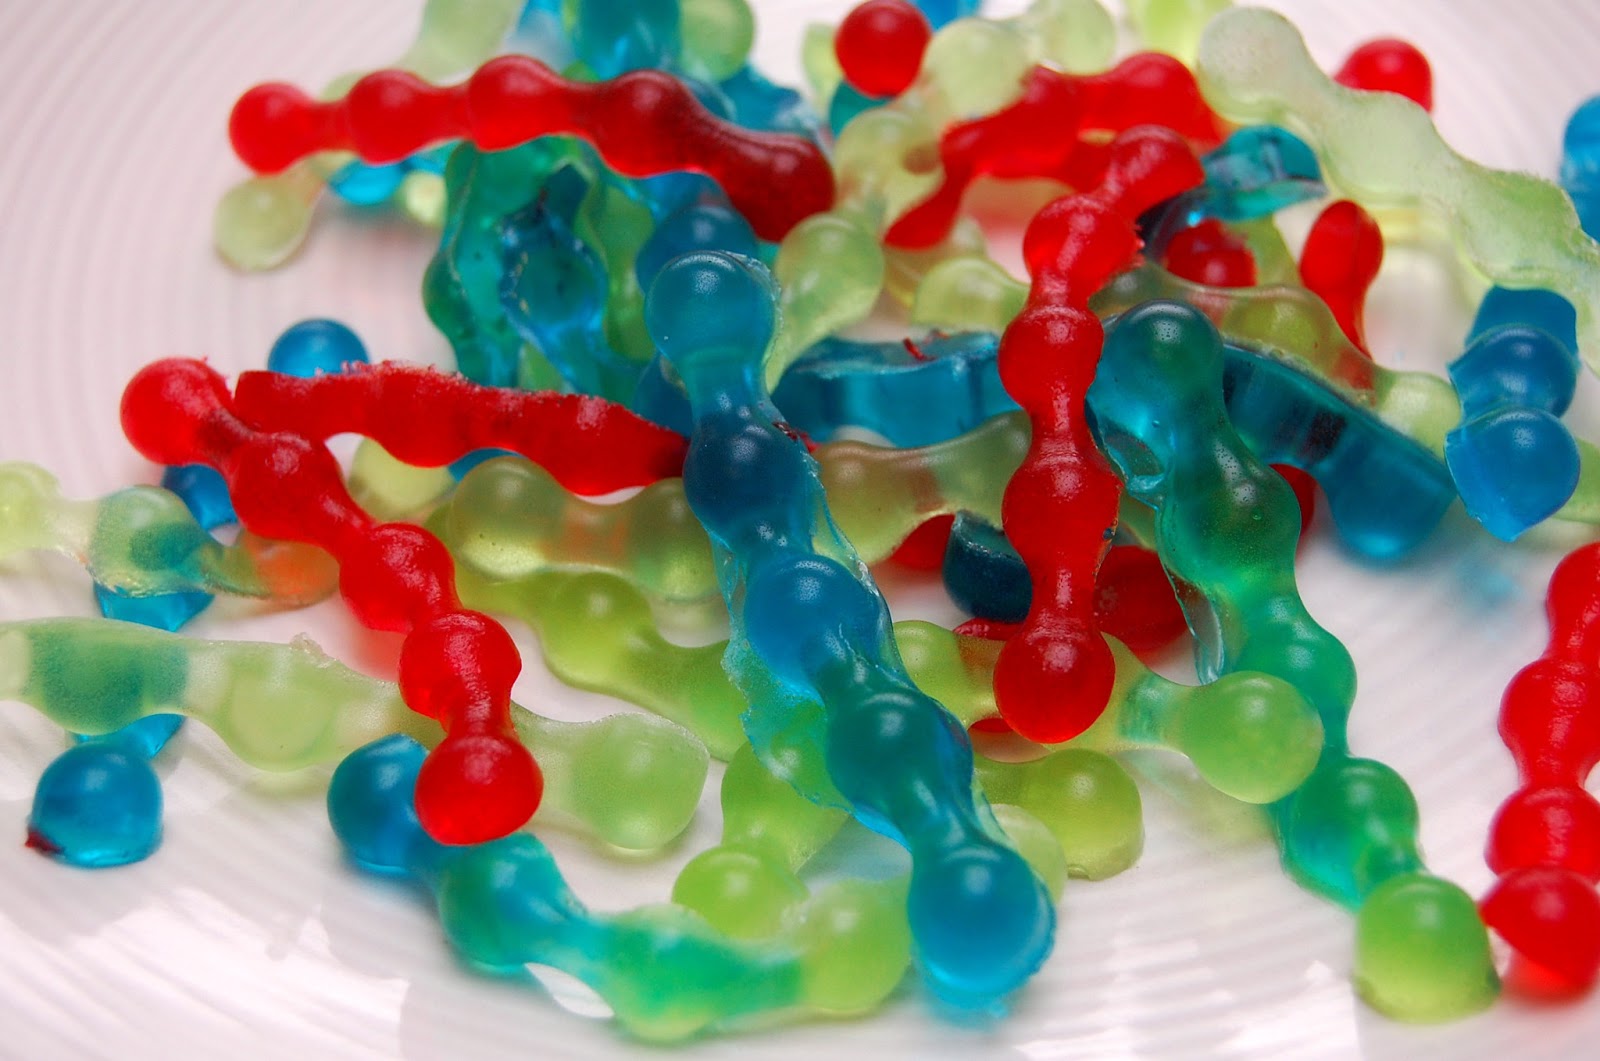 Sara's Super Happy Fun Blog of Awesomeness: How to make your own gummy